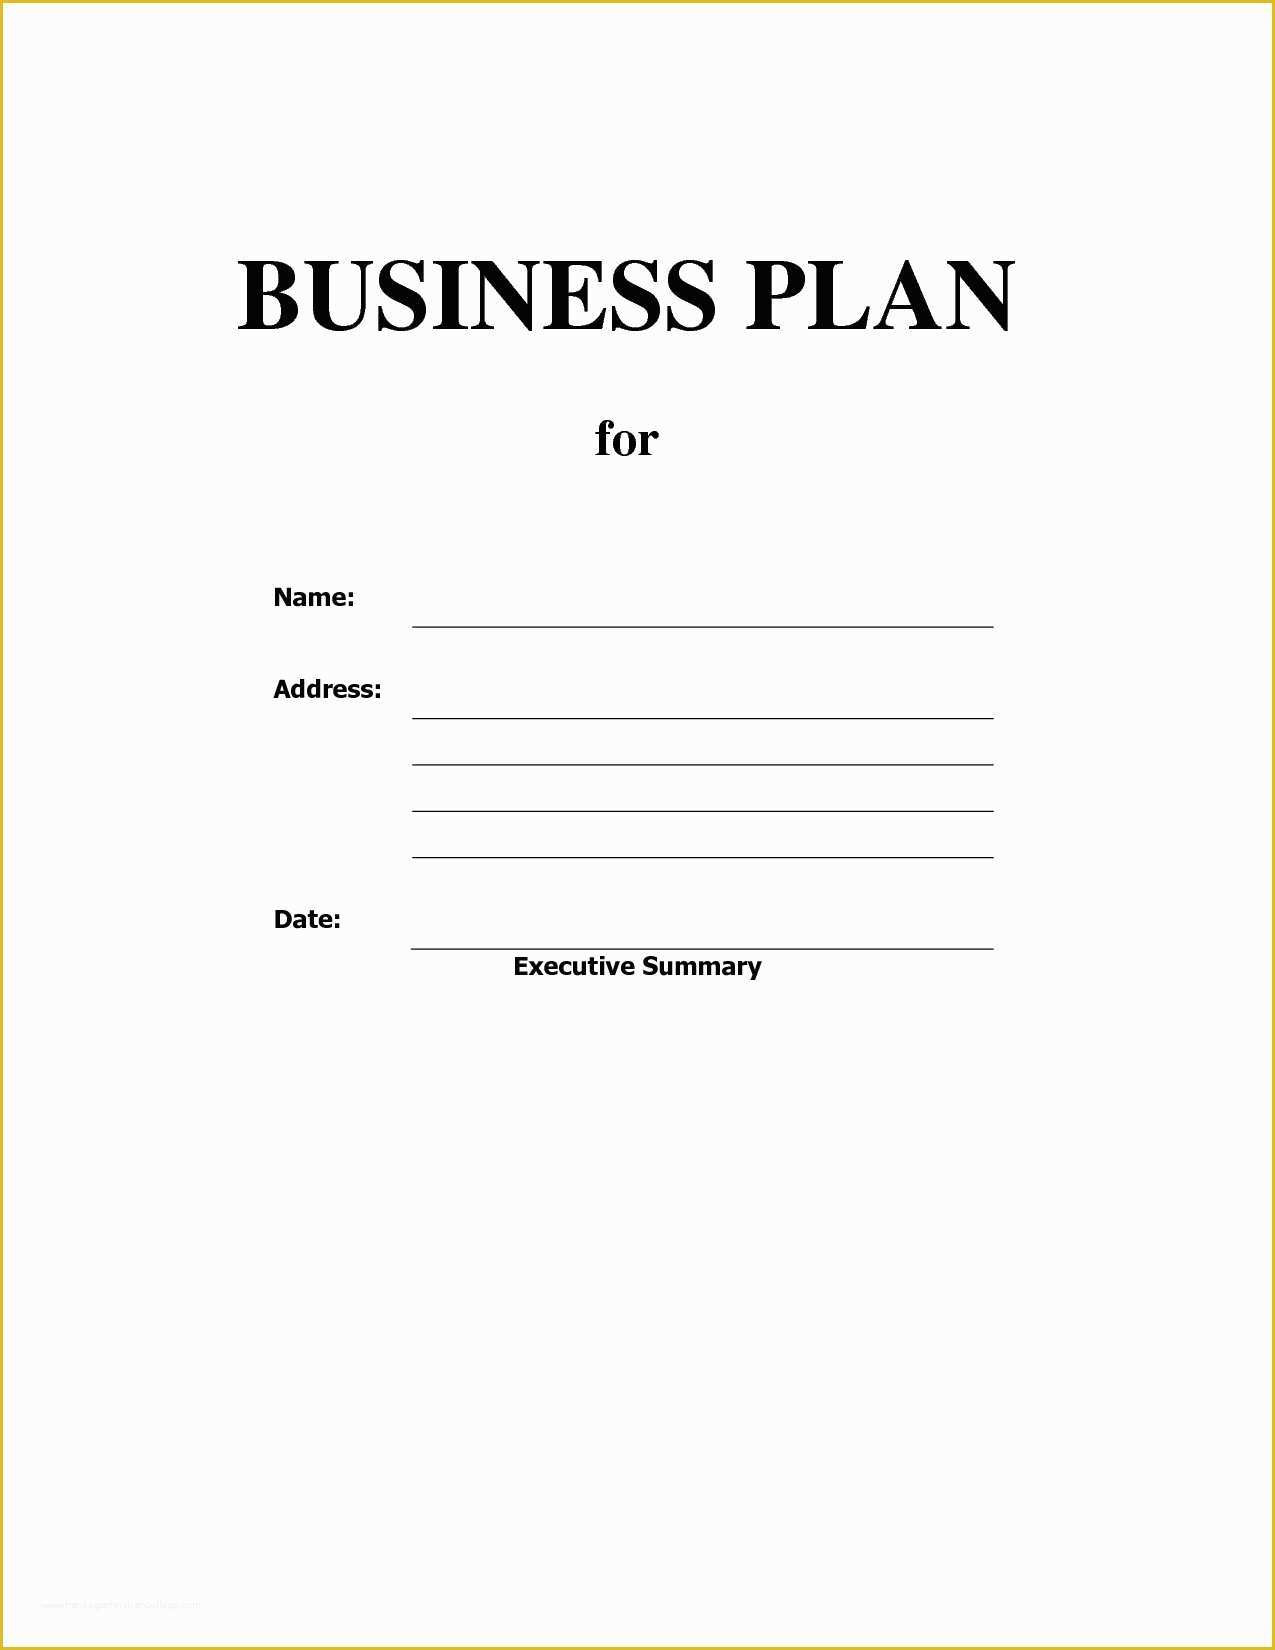 free business plan forms